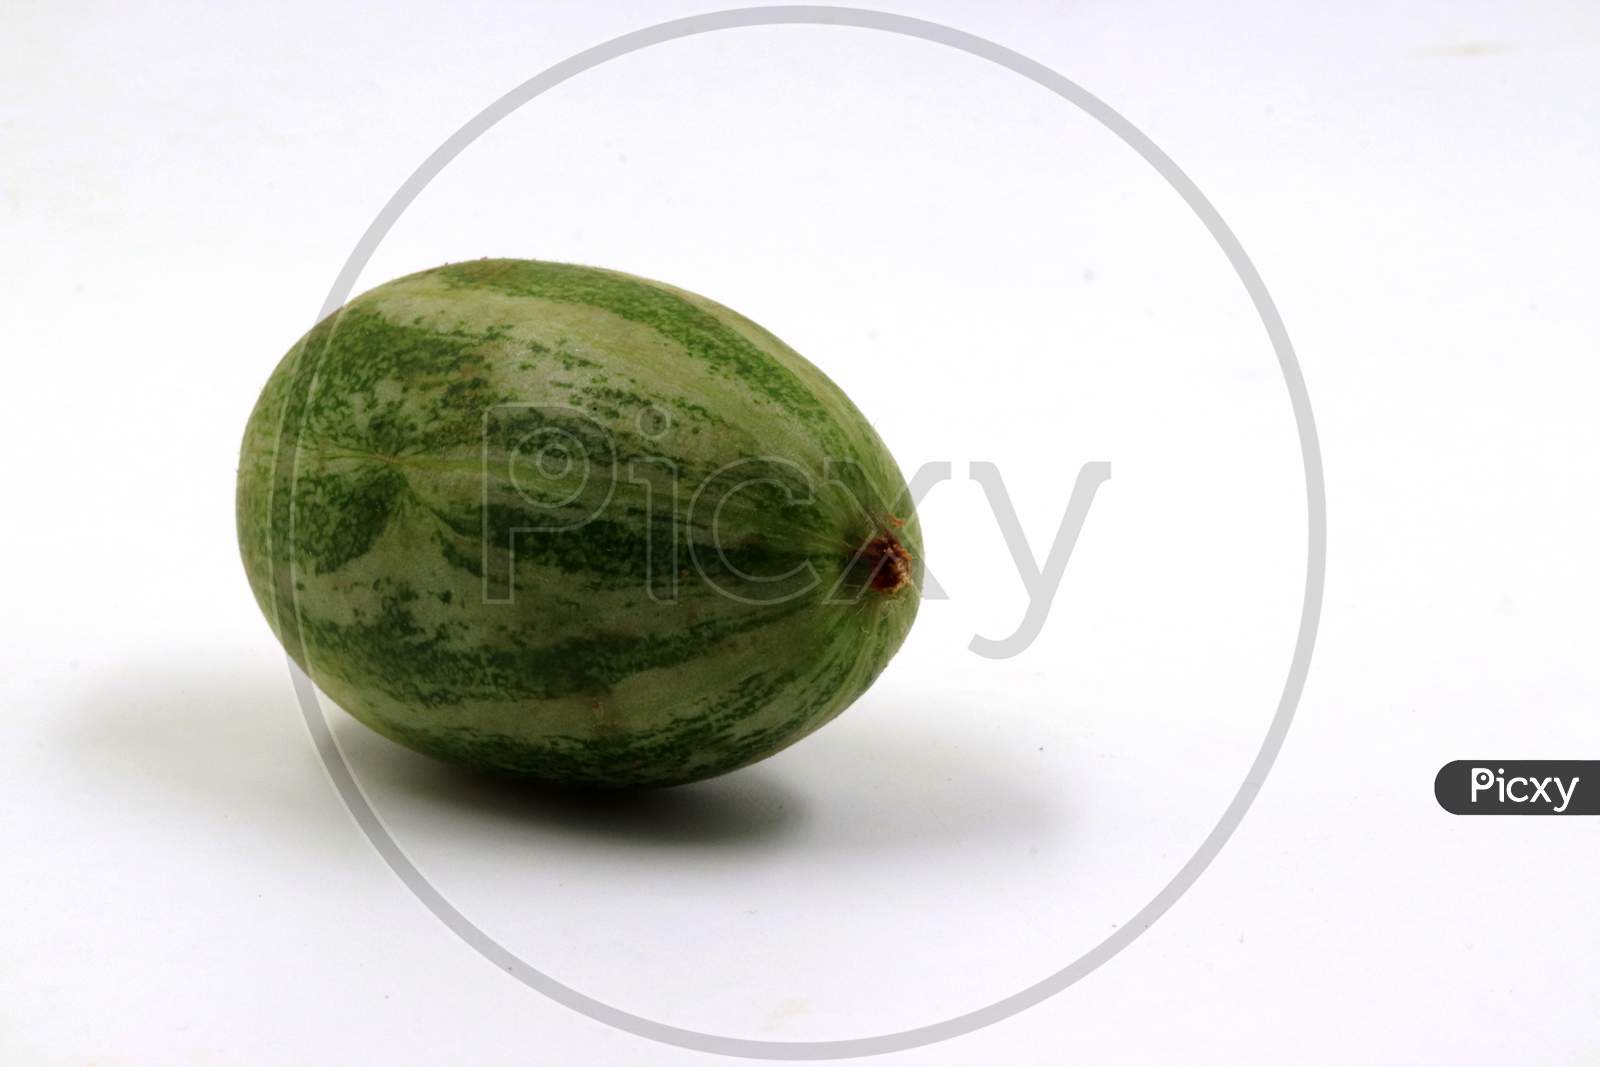 pointed gourd on white background